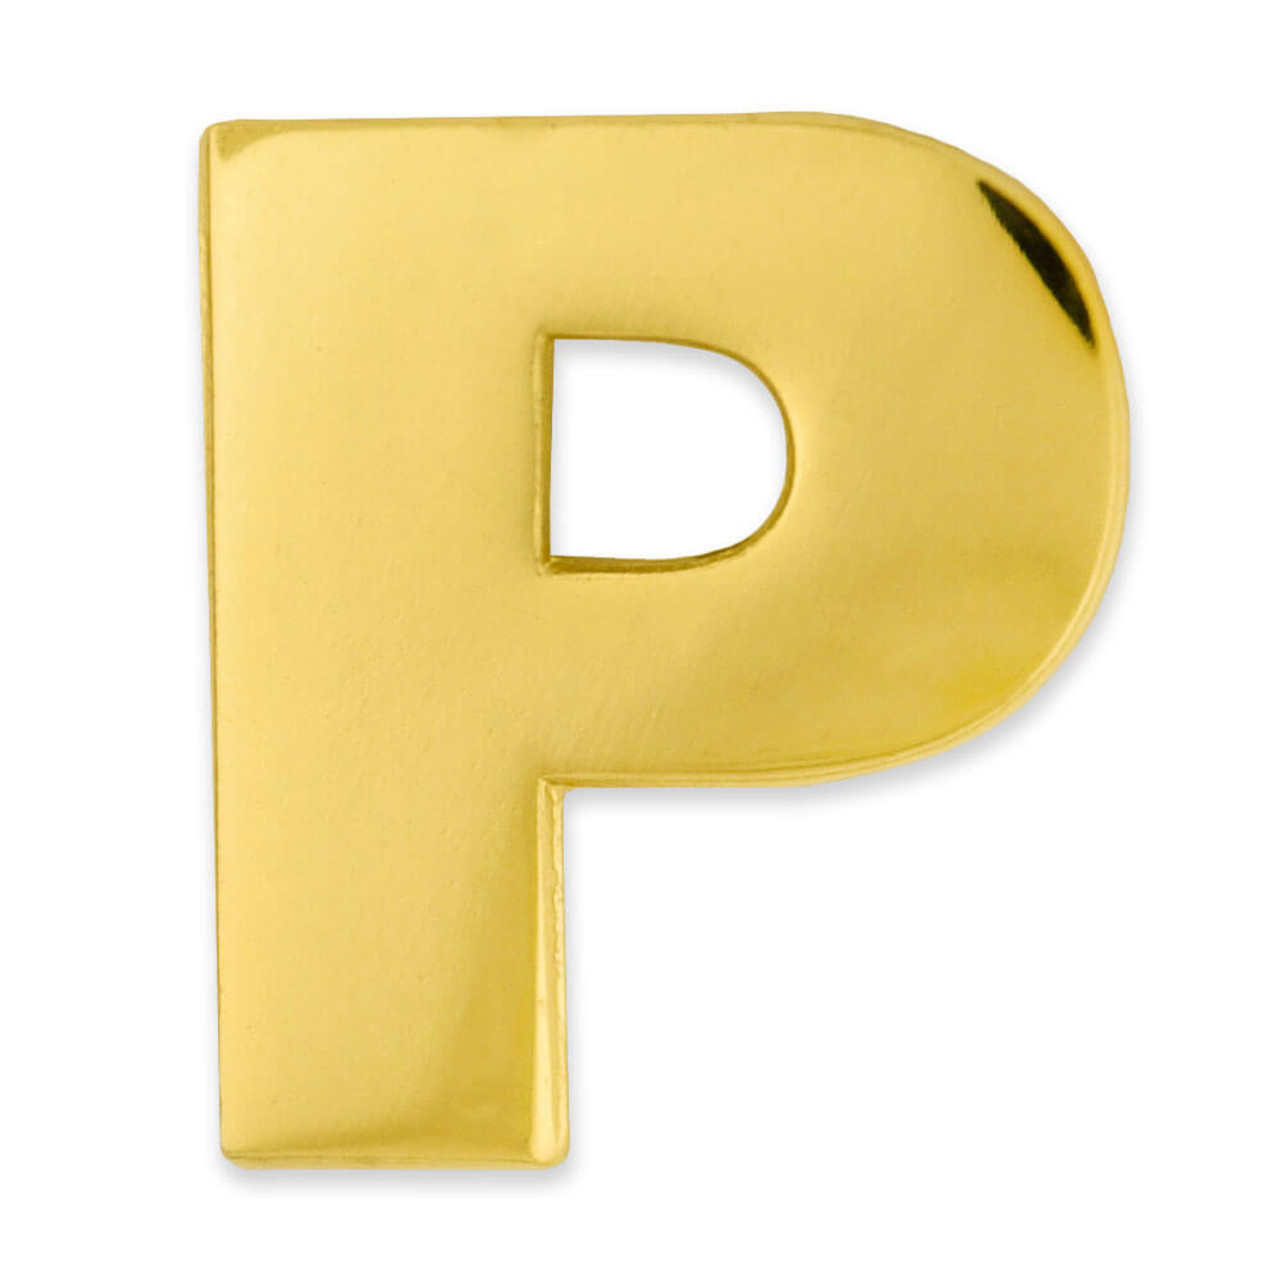 Gold S Pin | Gold | Initial Pins by PinMart